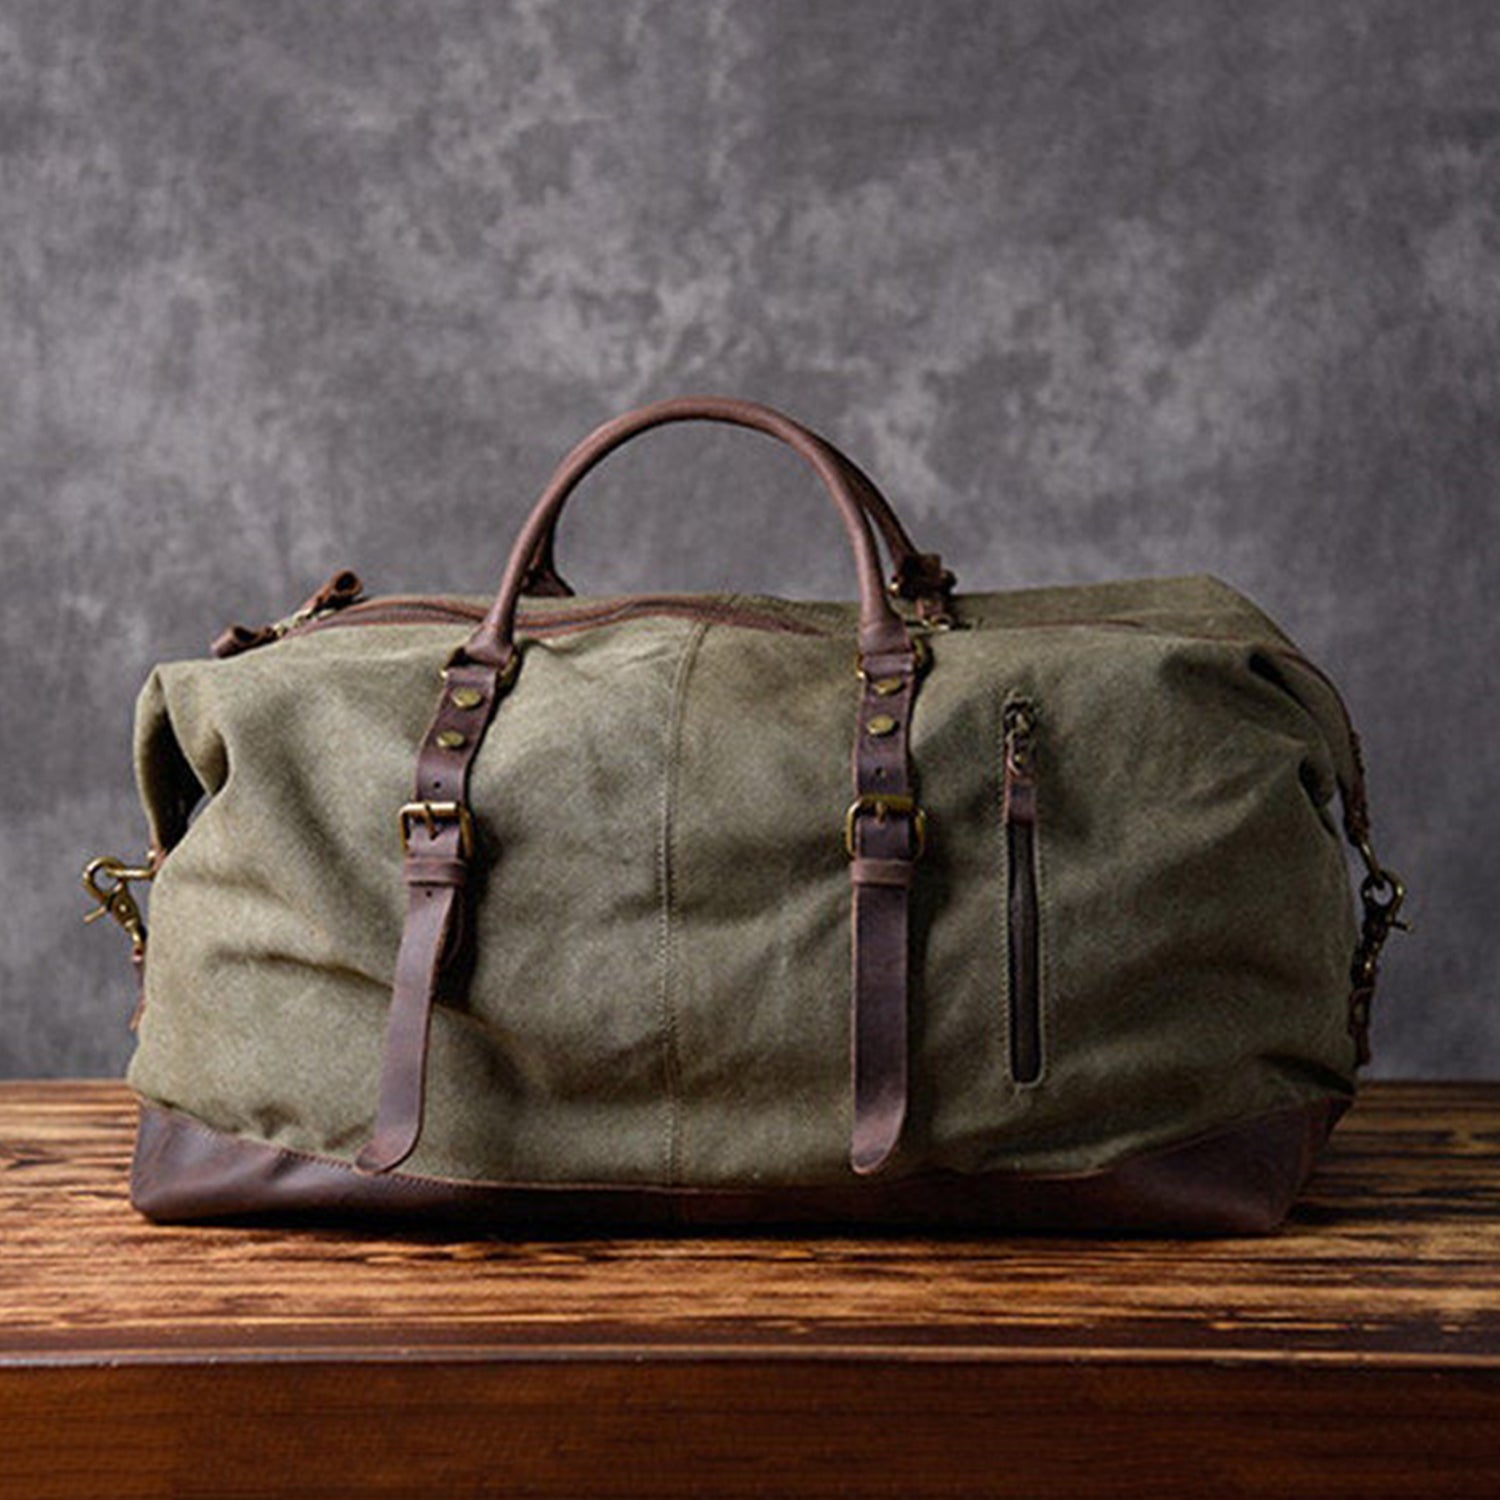 Filson's Ballistic Nylon Duffle Pack Really Is the Greatest Bag Ever Made |  WIRED UK